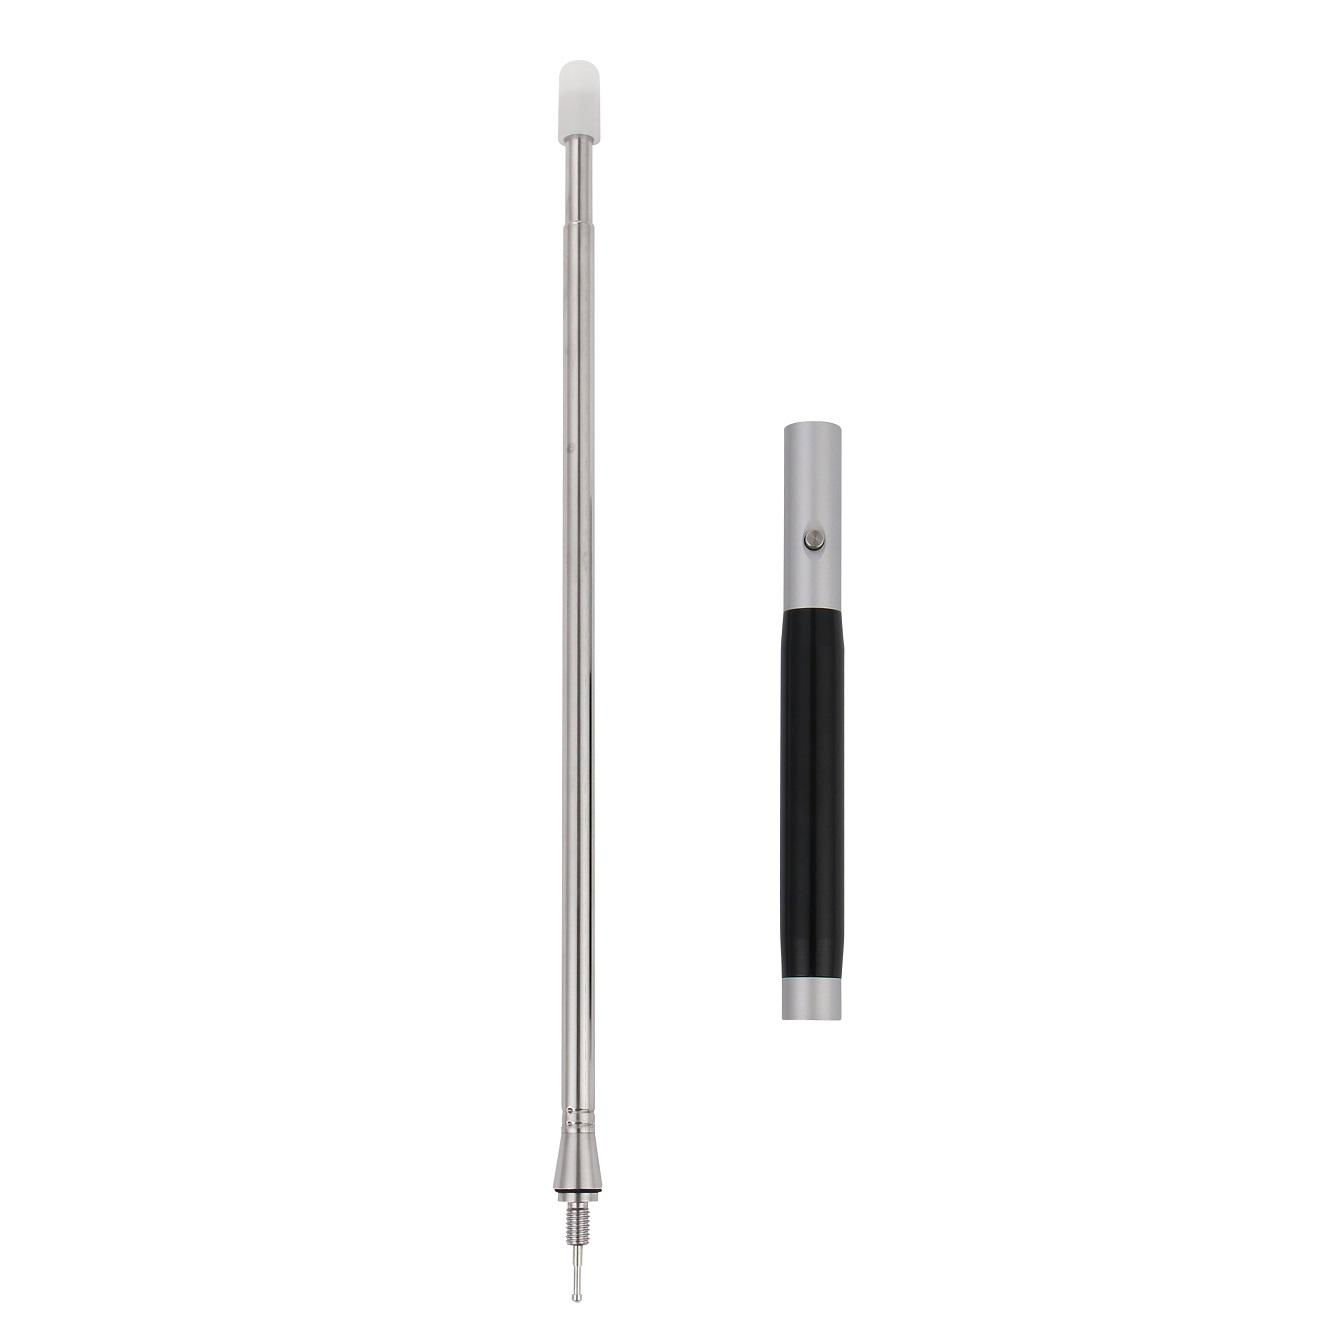 Excellent Infrared IR Pen Pointer E-Pen with Button for Interactive Whiteboards 2